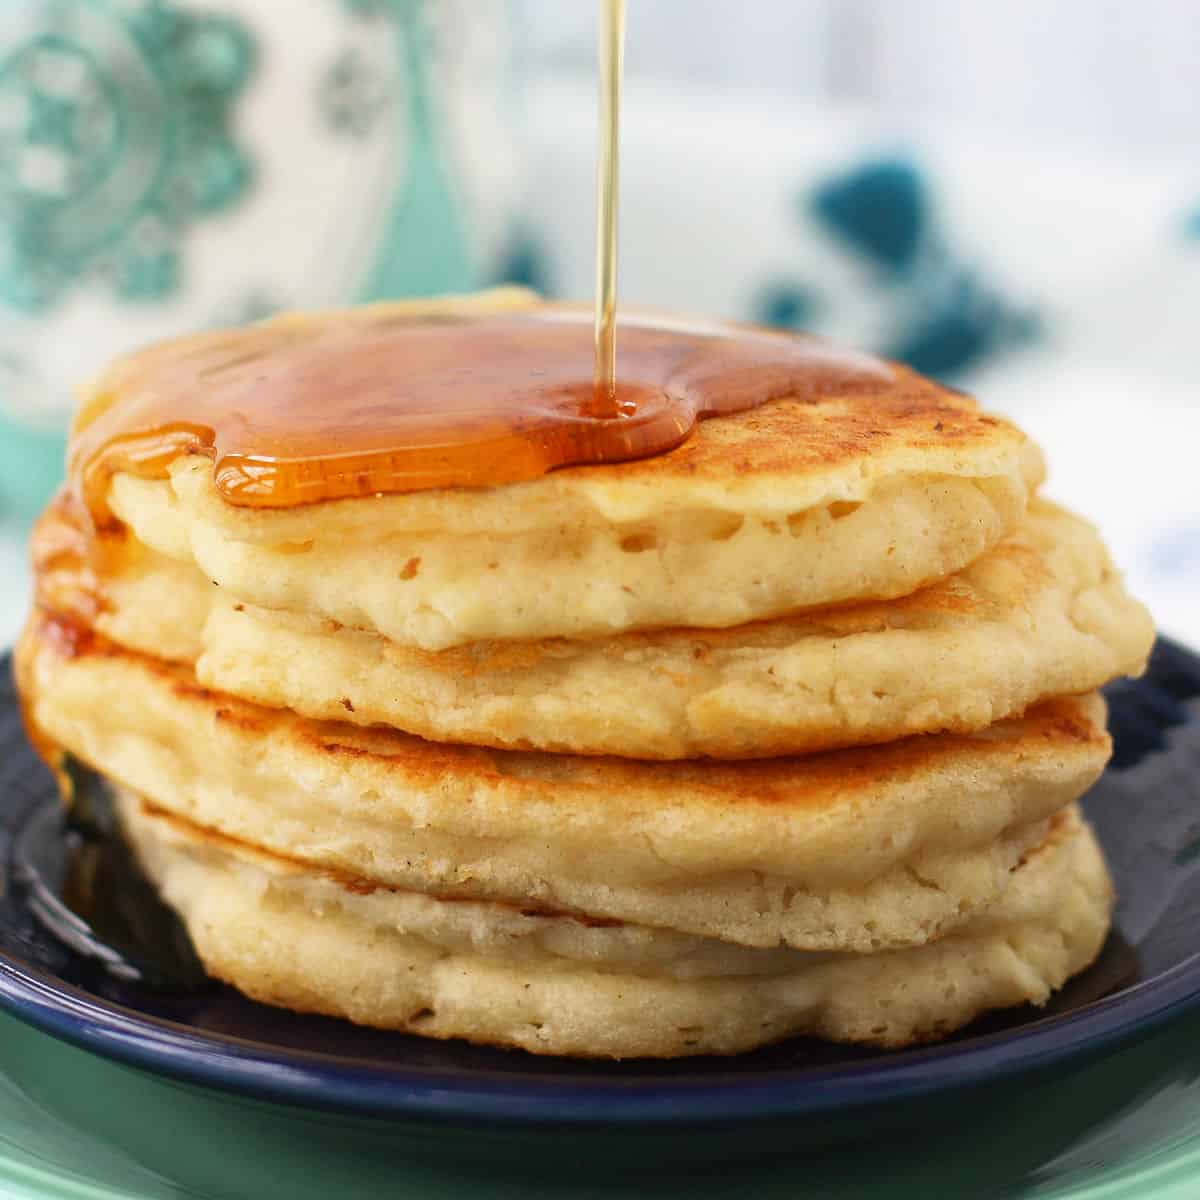 Learn to Make Fluffy Vegan Pancakes the Easy Way - The Pretty Bee